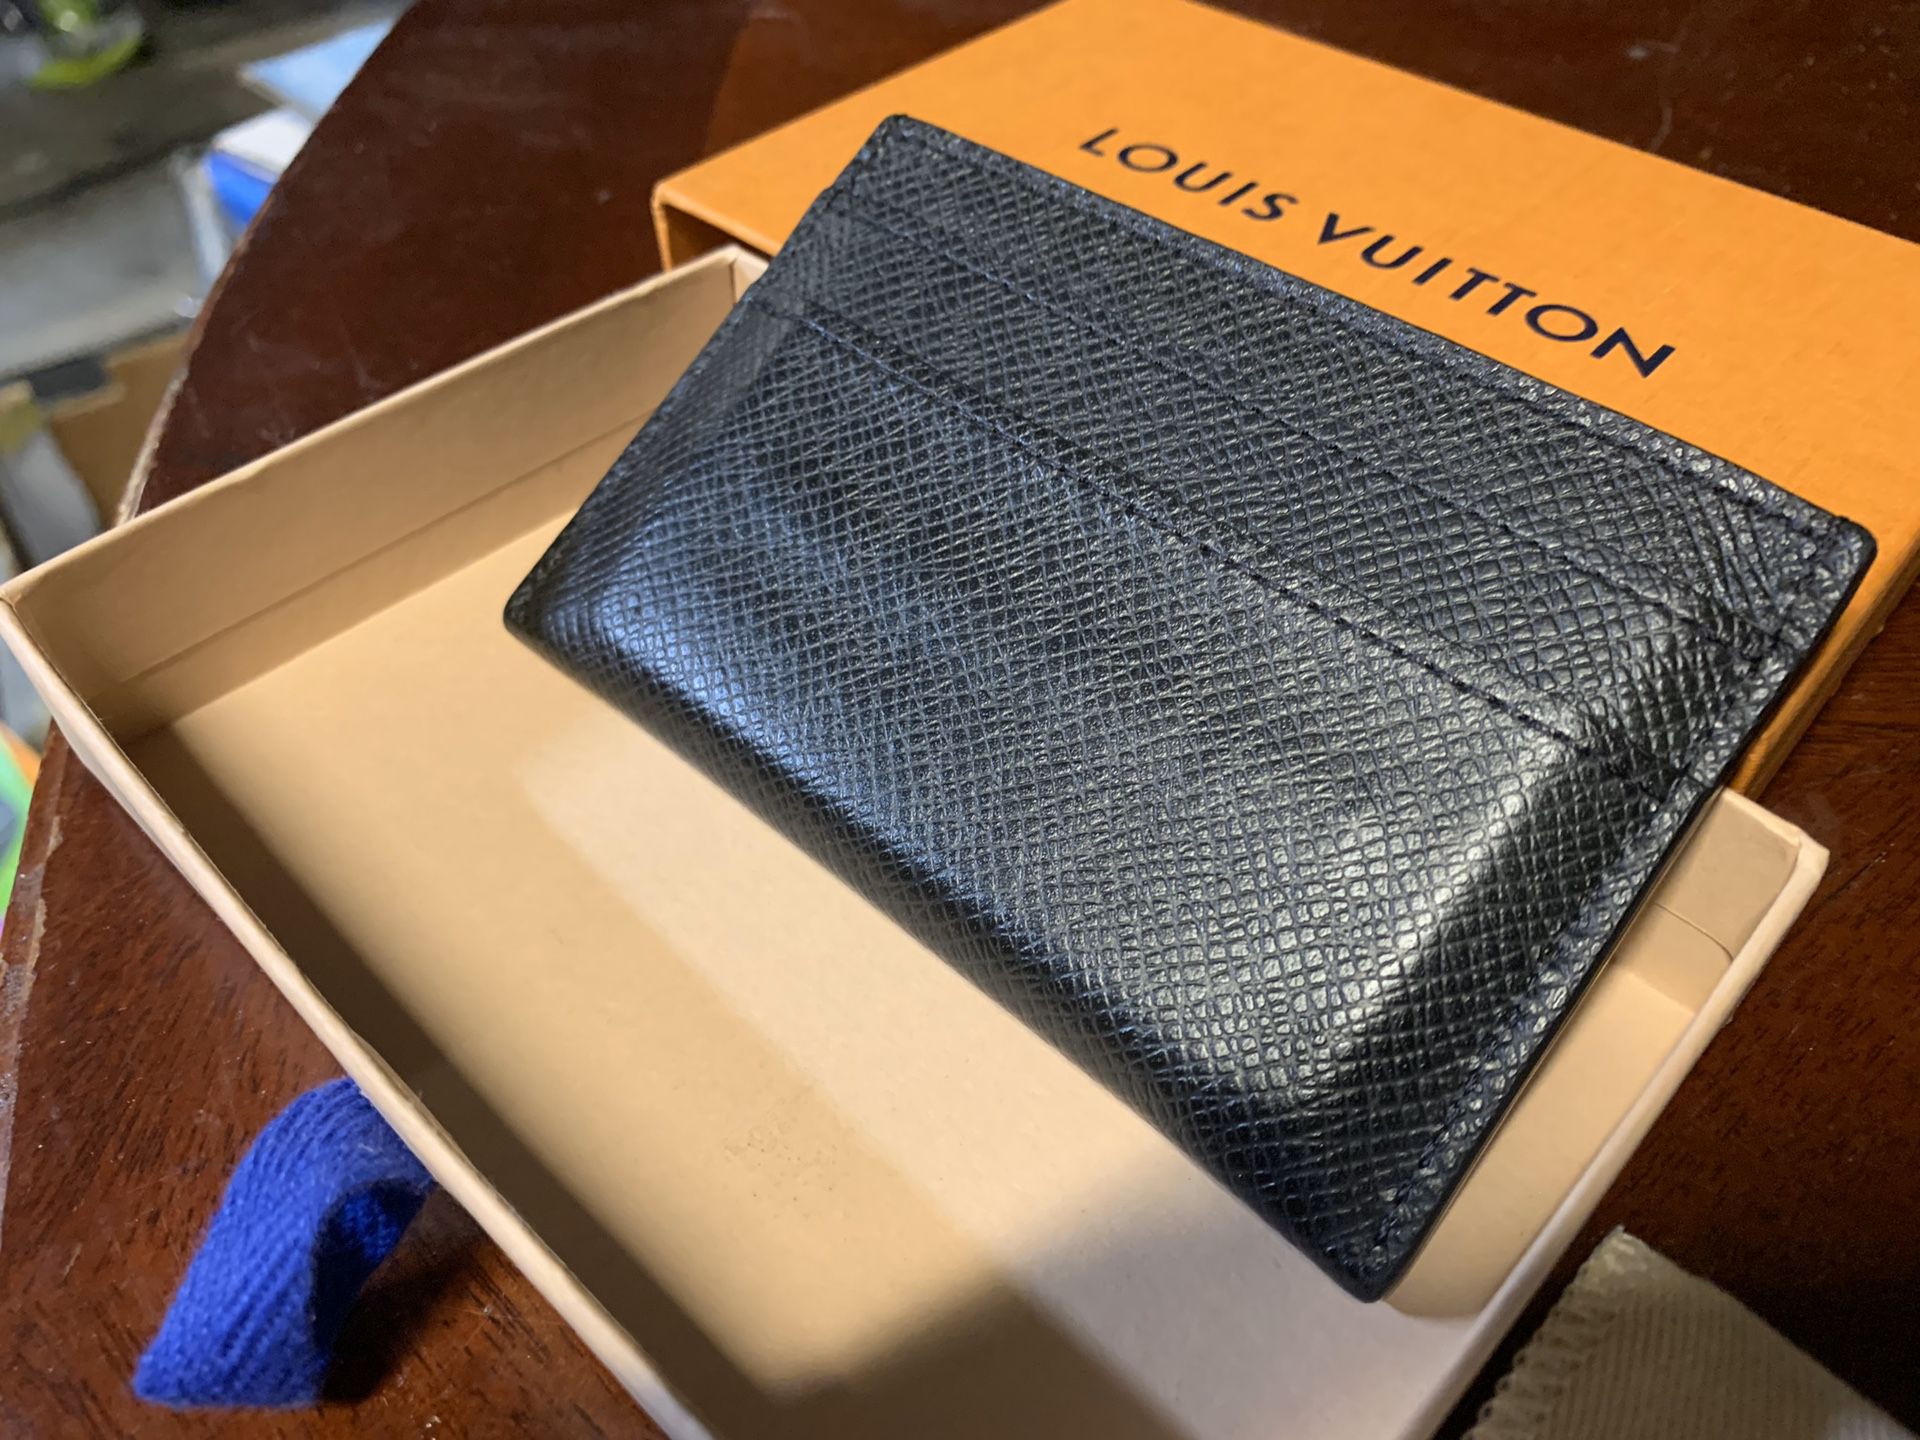 Louis Vuitton wallet or card holder $150 real deal